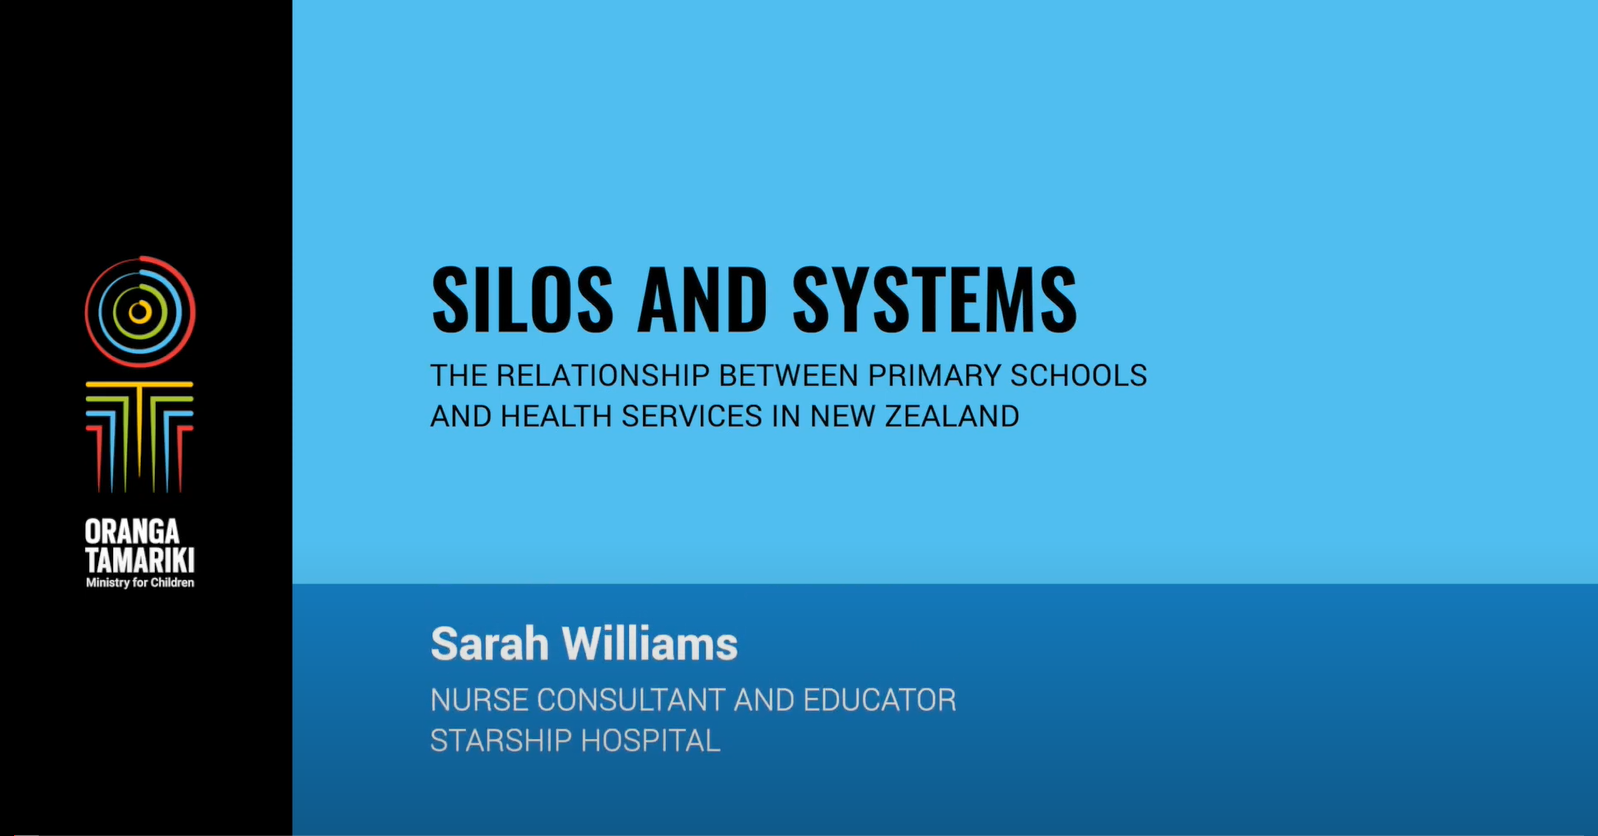 Silos and systems video thumbnail